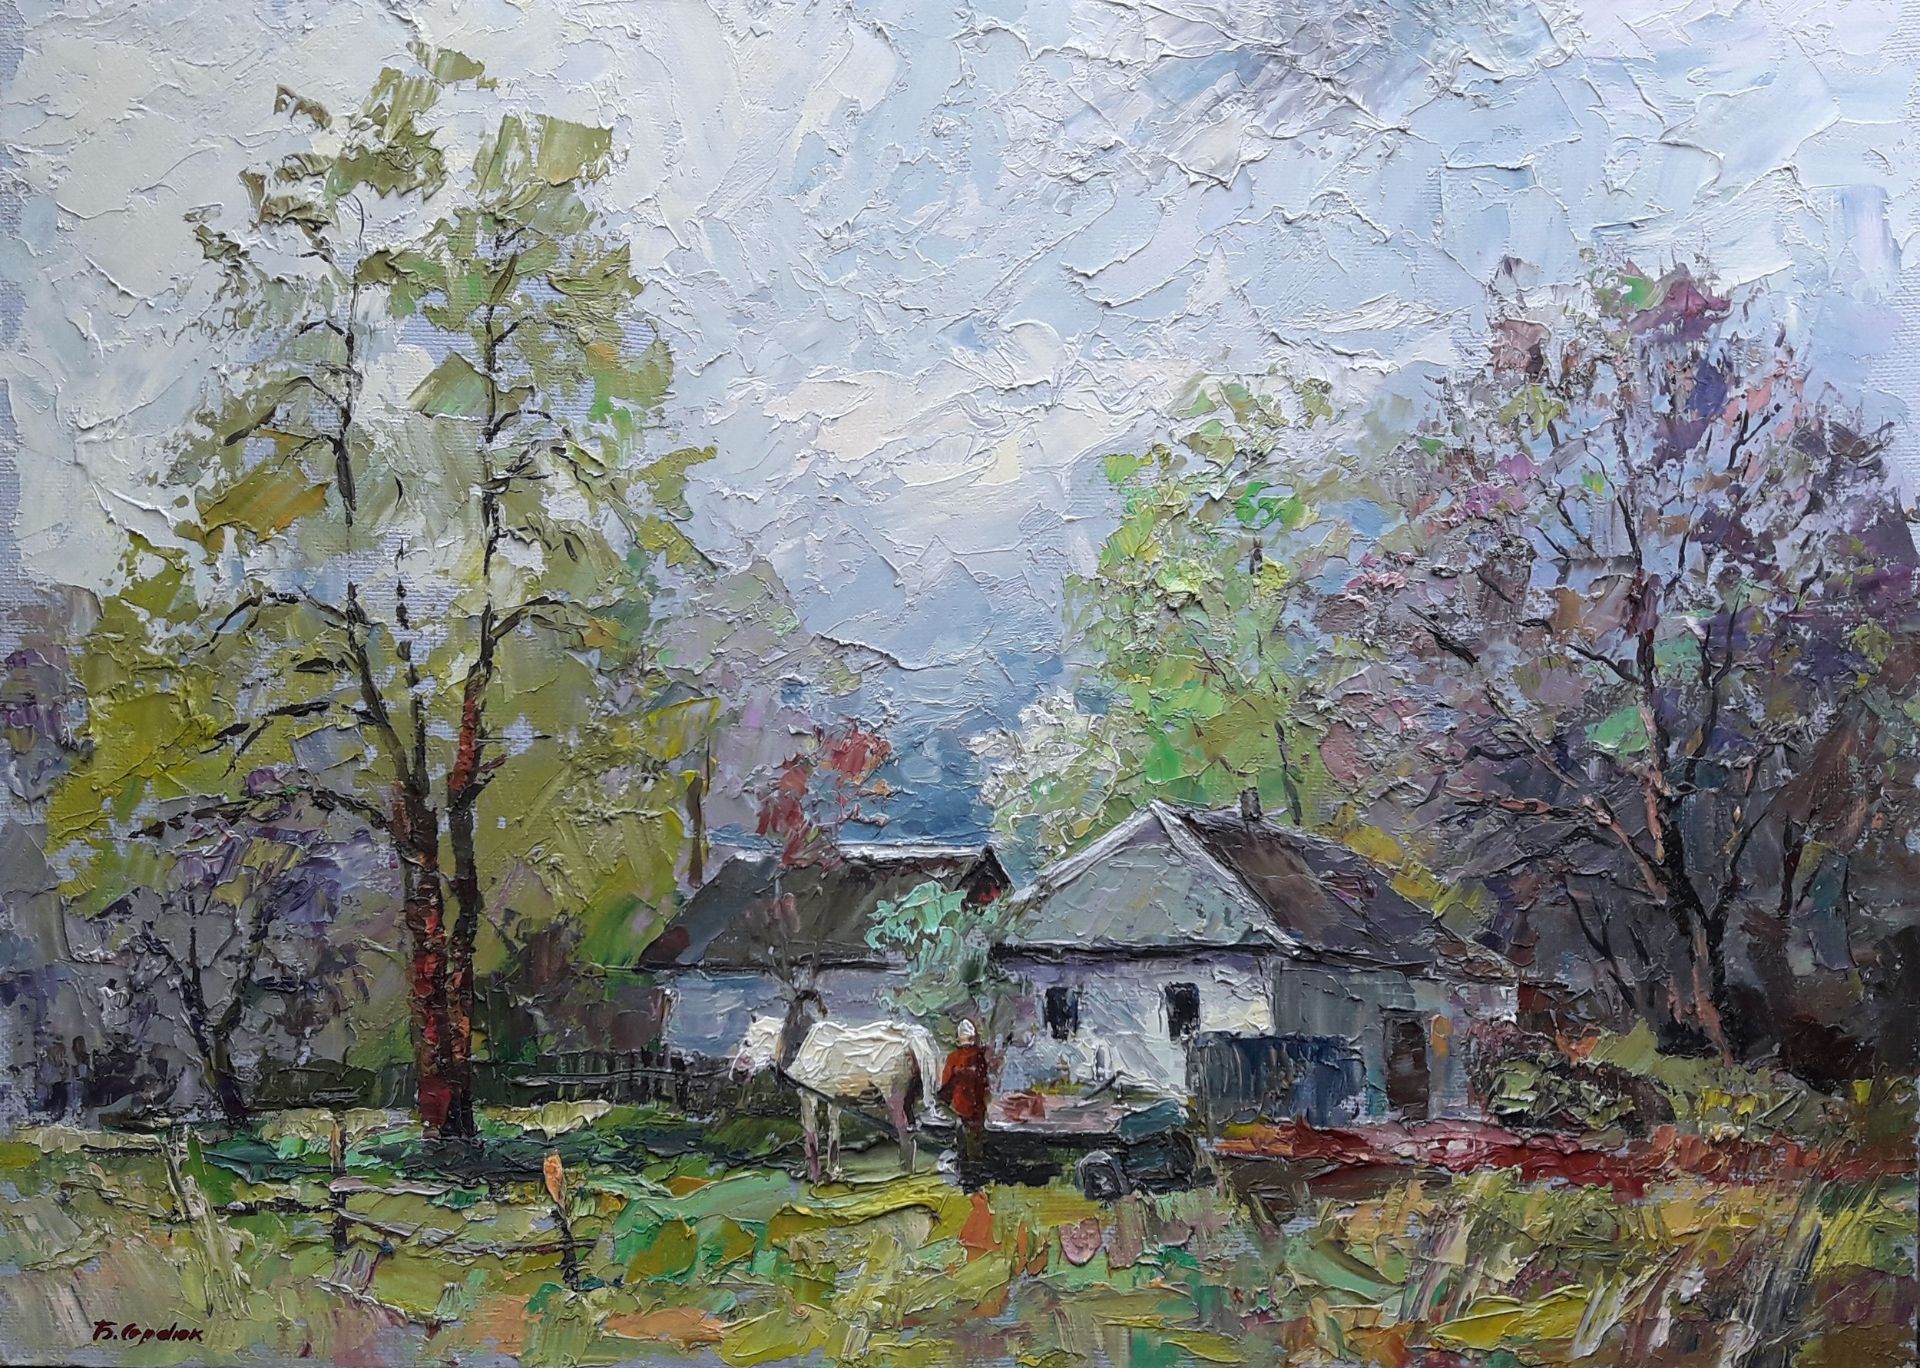 Oil painting Parent's house Serdyuk Boris Petrovich. "№SERB 22 ** ABOUT THIS PAINTING ** *